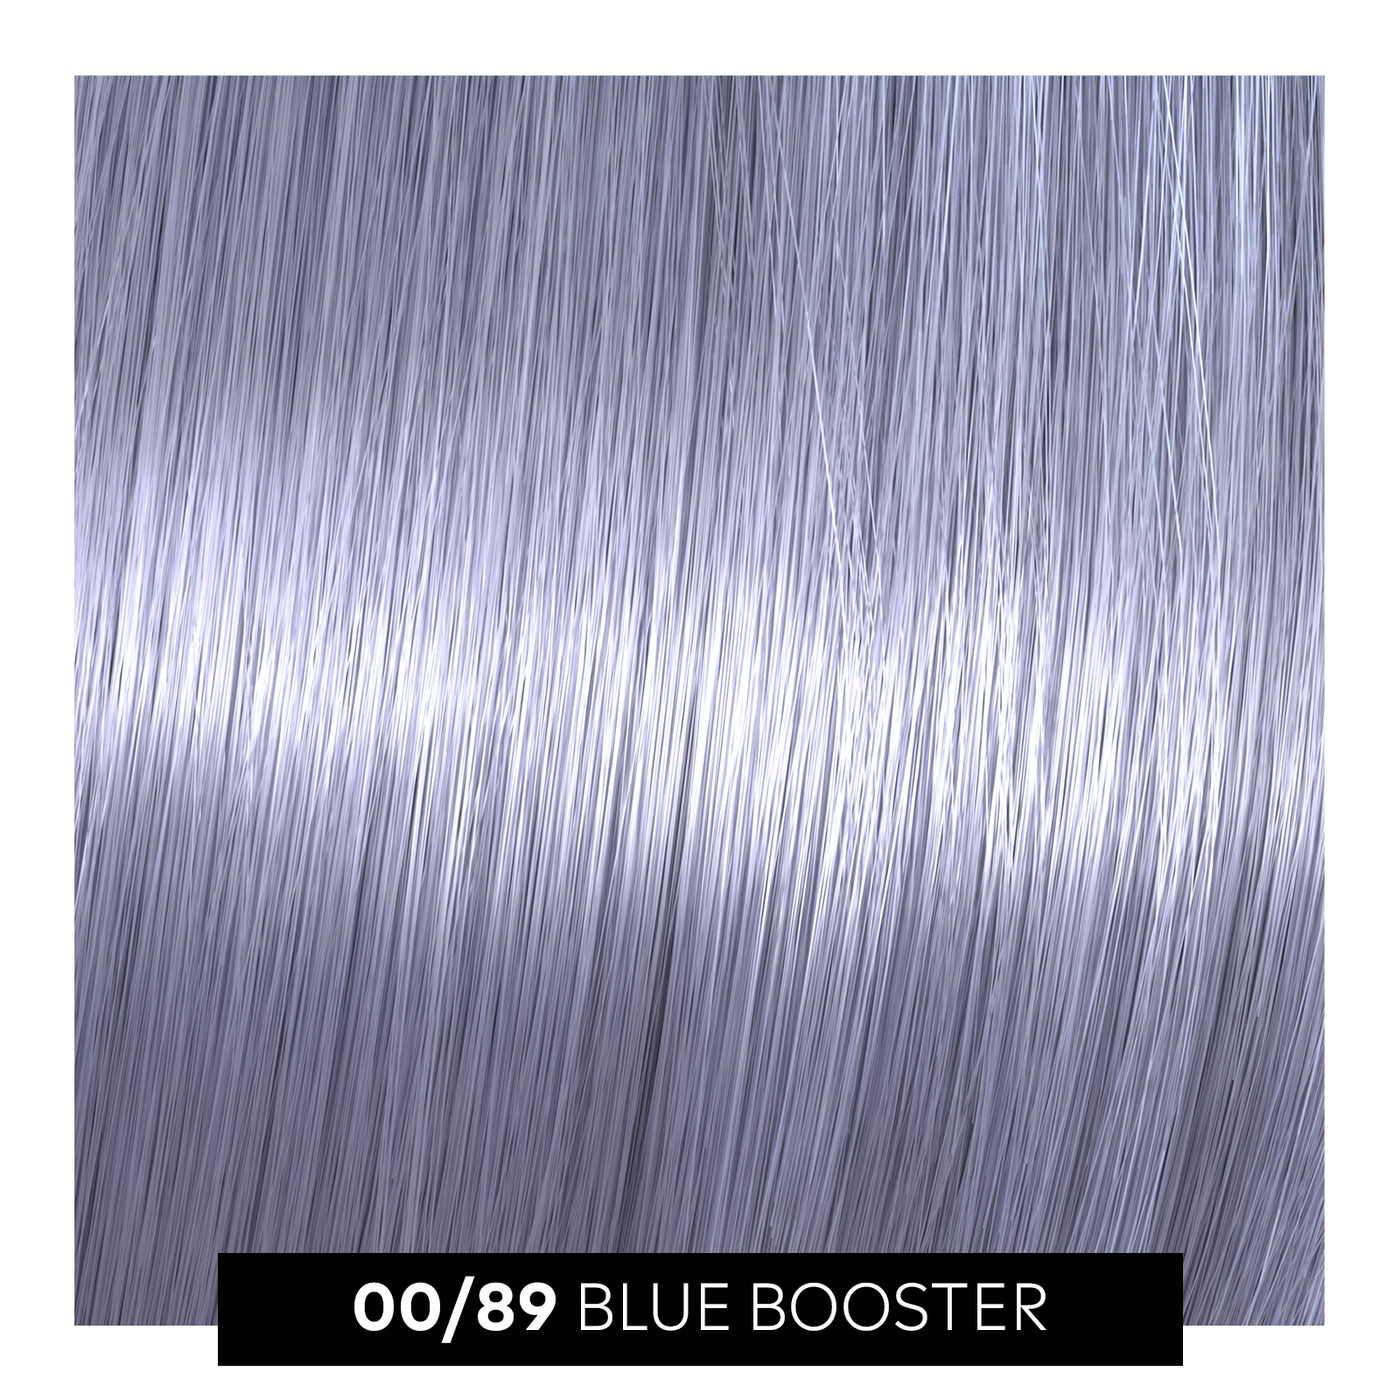 00/89 Blue booster